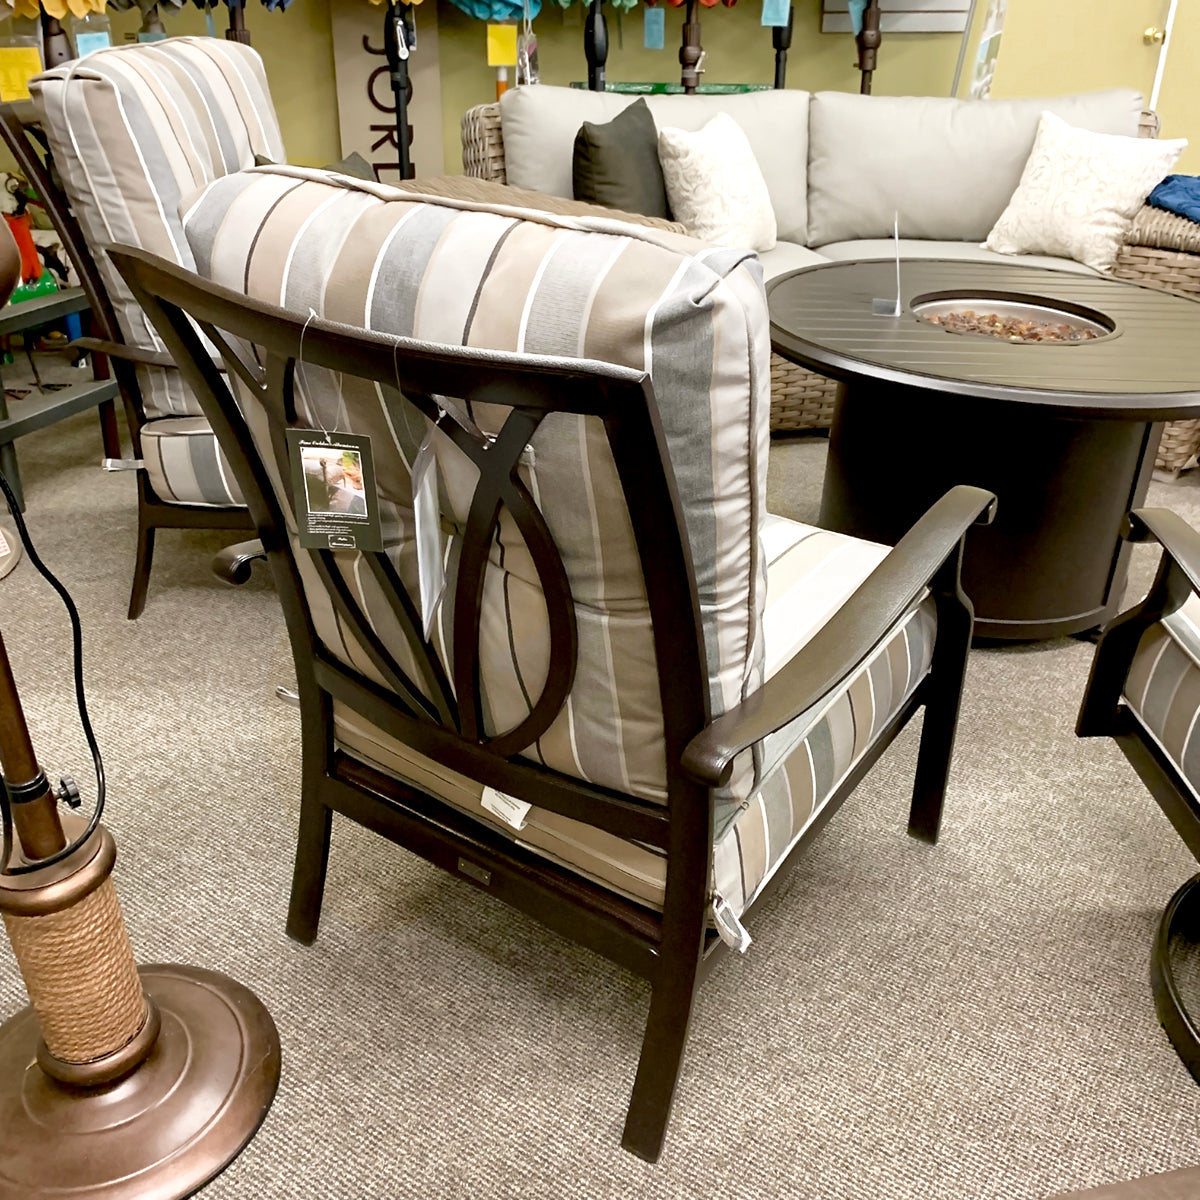 Patio Renaissance Mandalay Patio Lounge Chair is available at Jacobs Custom Living our Jacobs Custom Living Spokane Valley showroom.